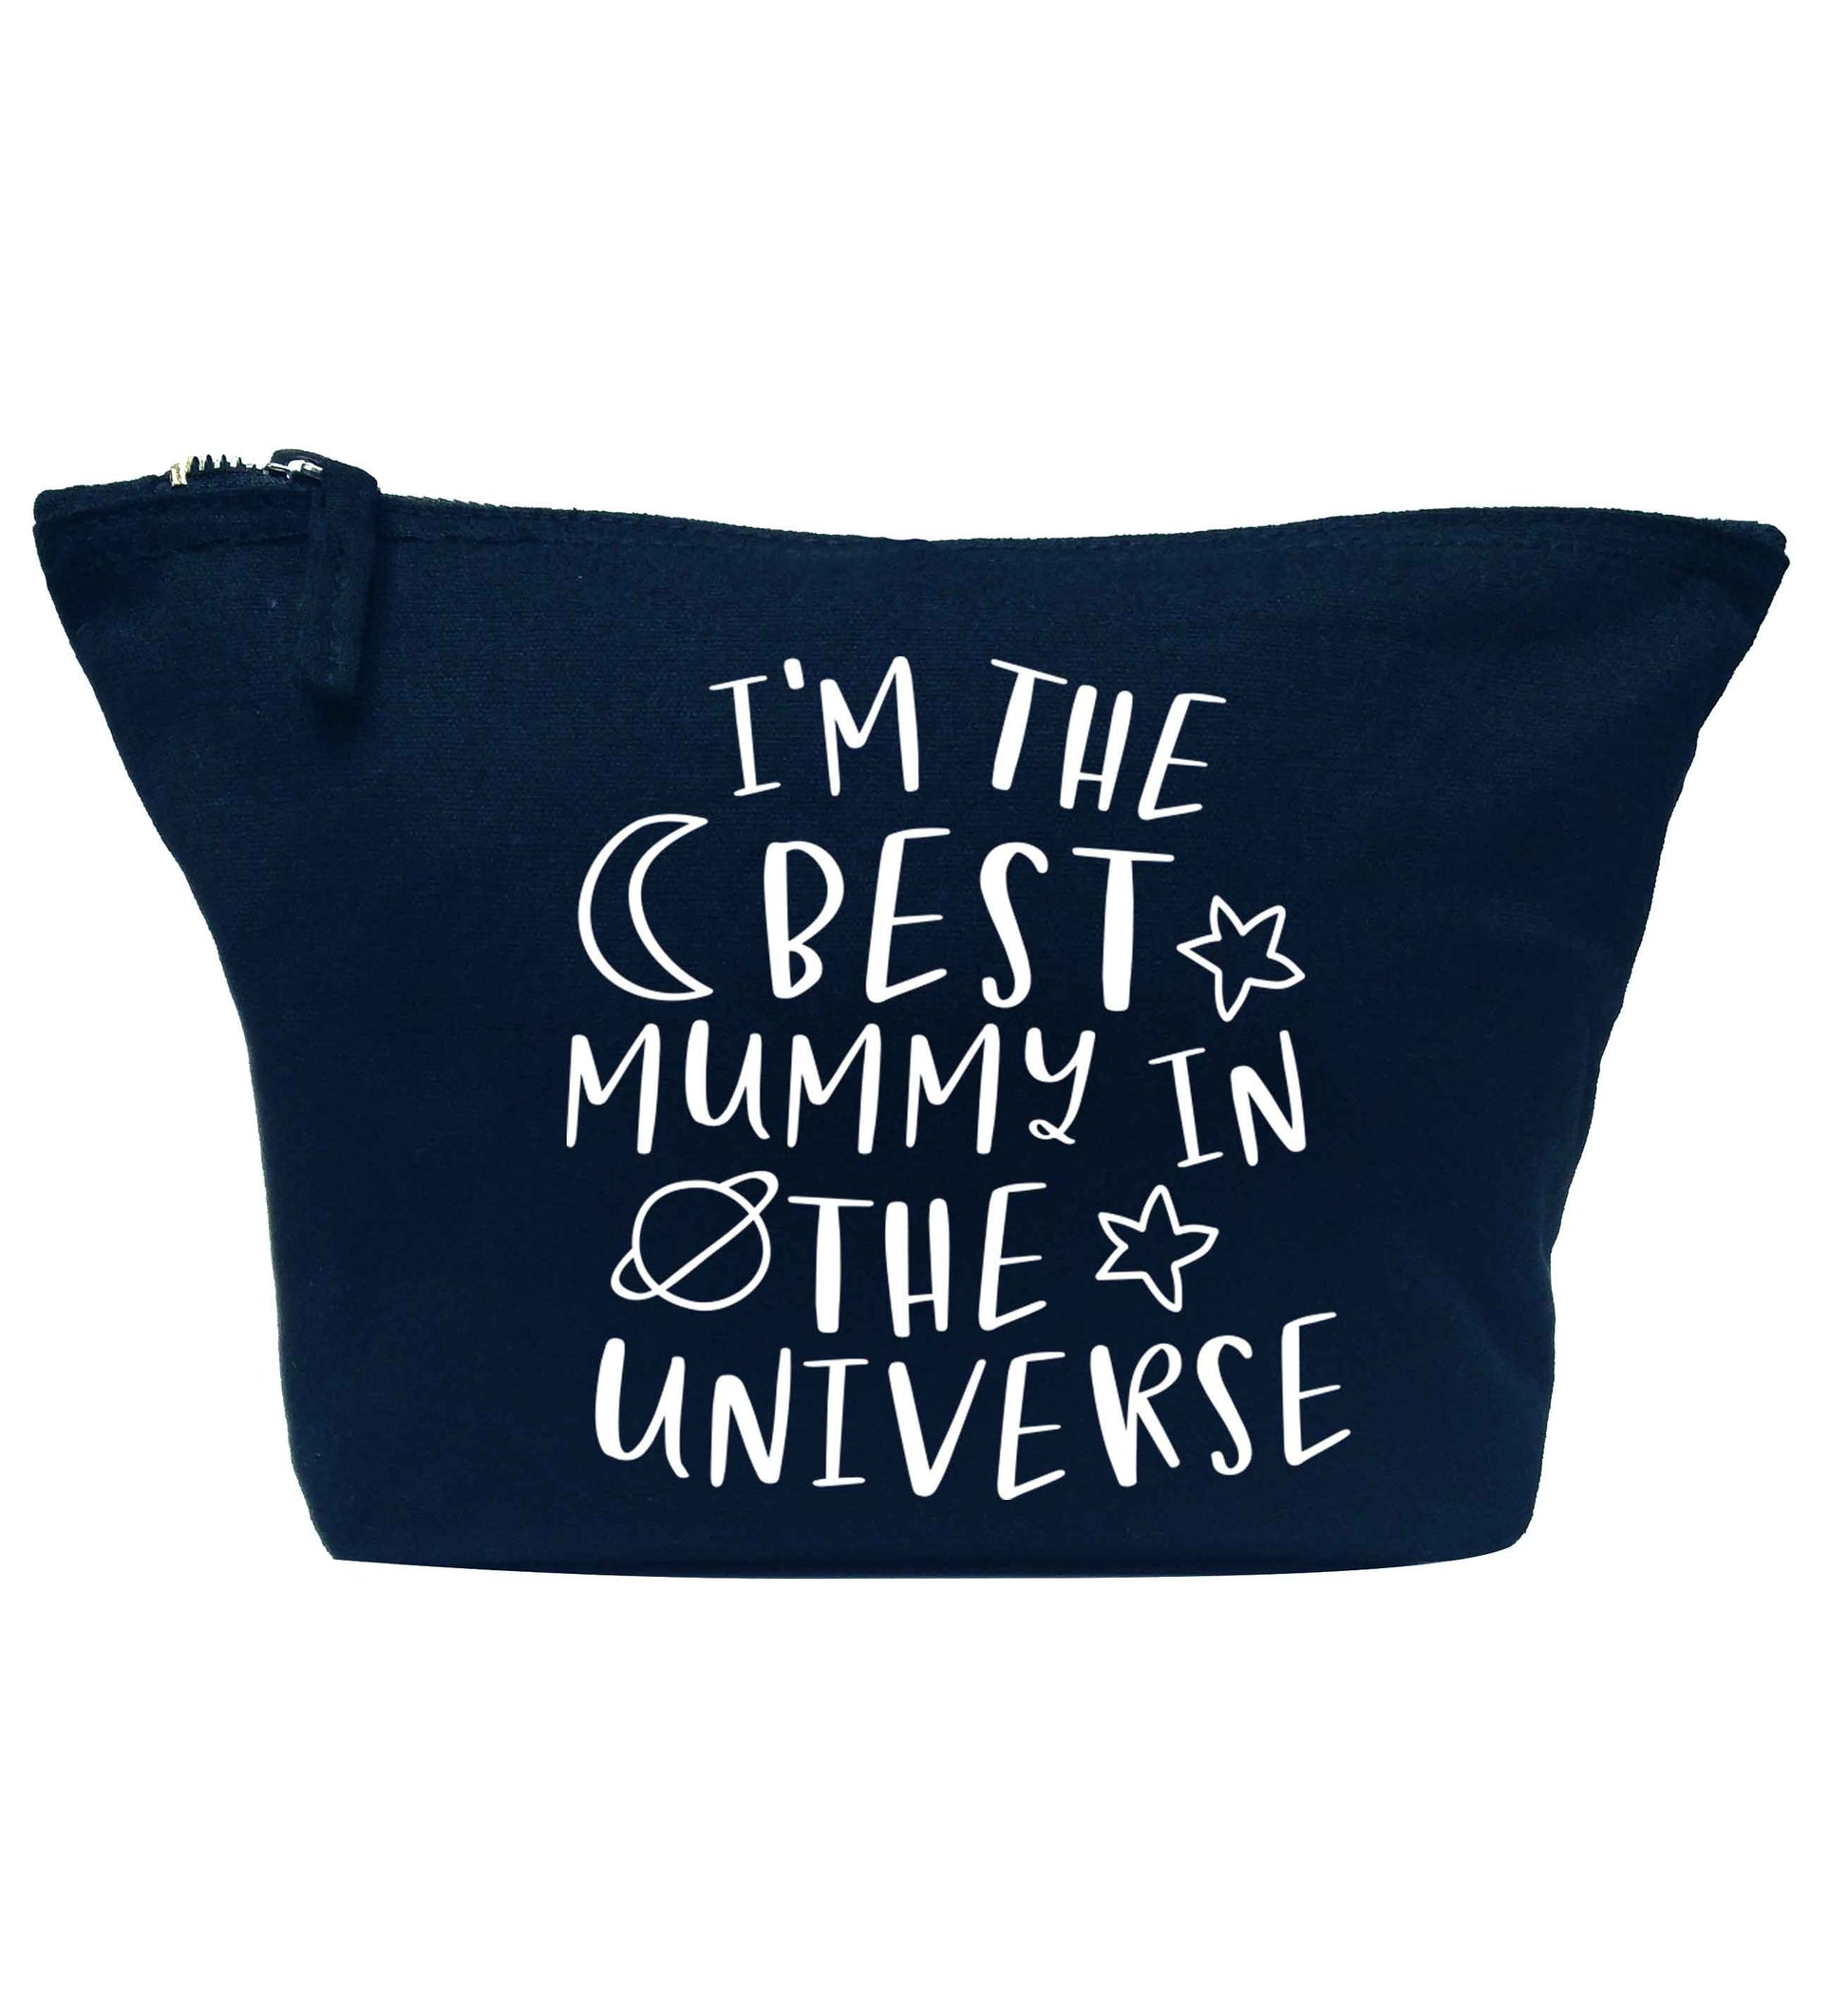 I'm the best mummy in the universe navy makeup bag